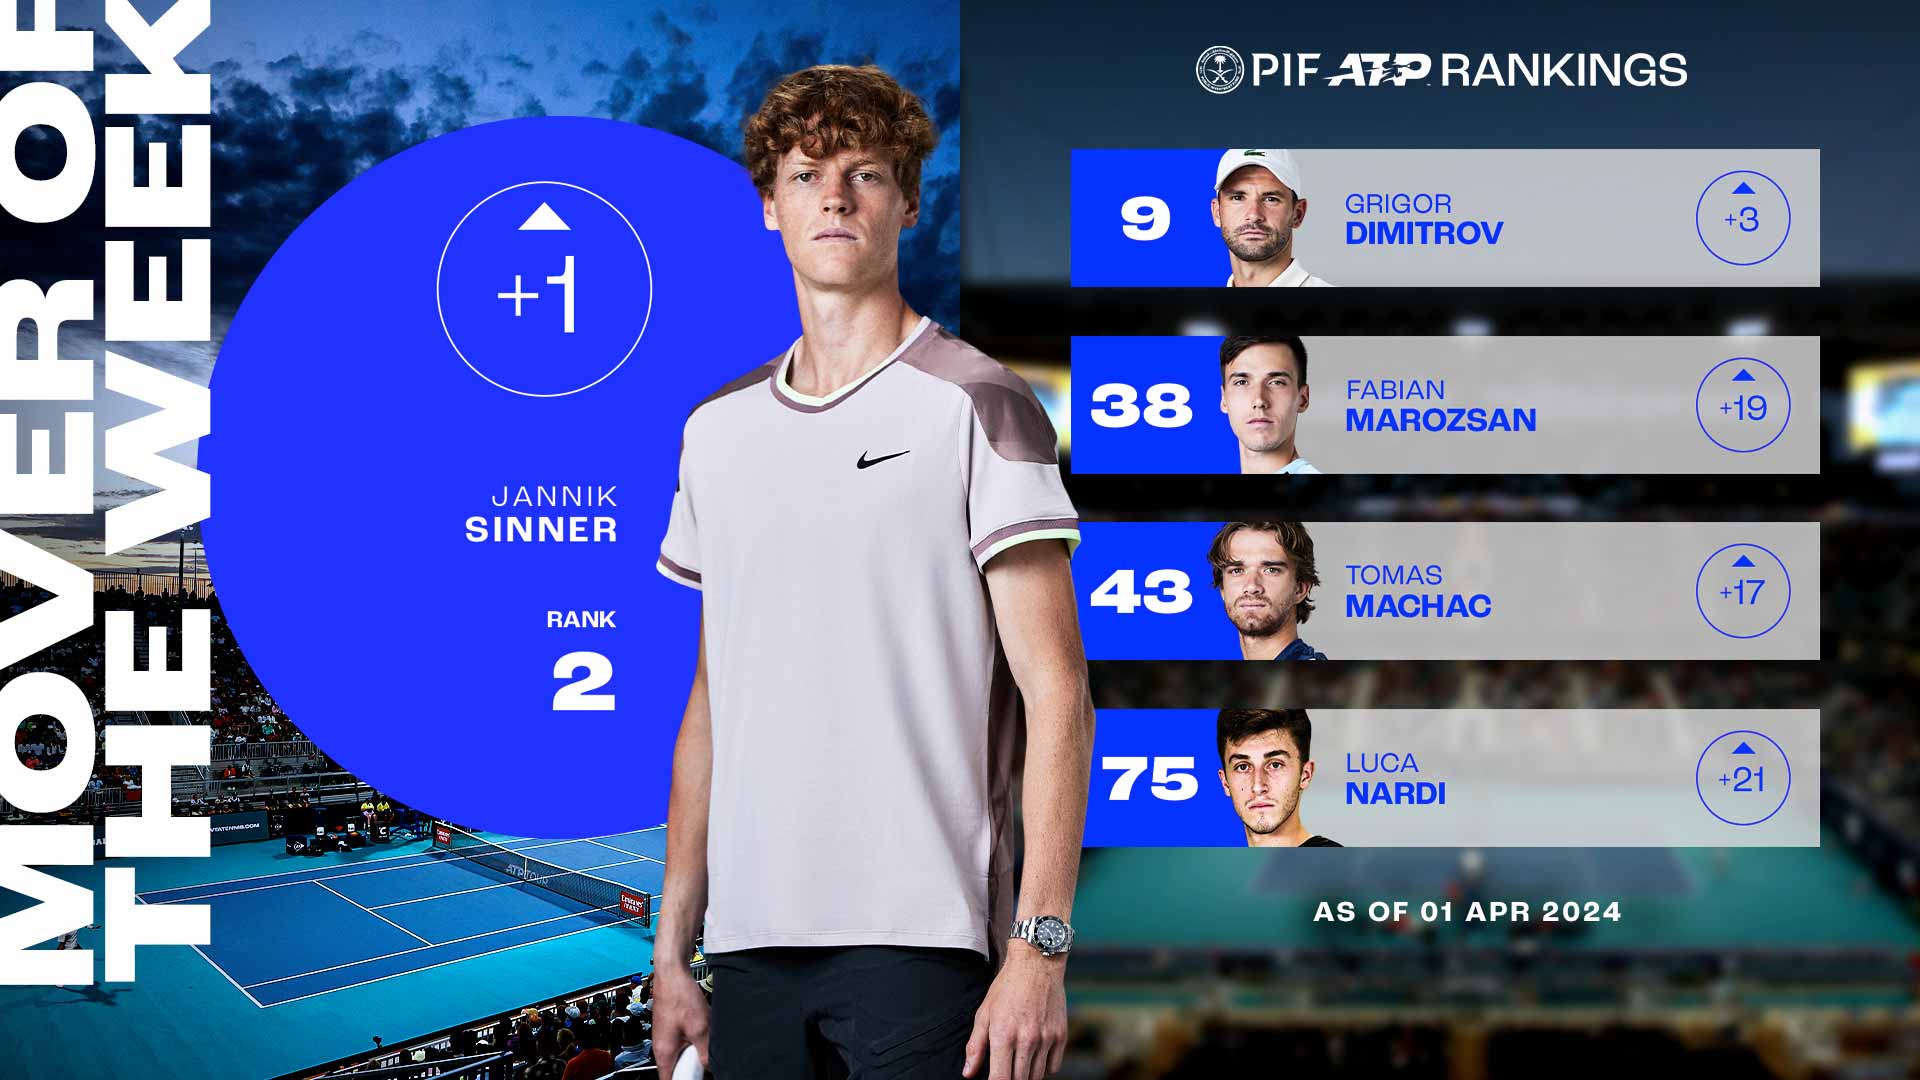 Jannik Sinner has risen to a career-high World No. 2 after his victory at the Miami Open presented by Itau.